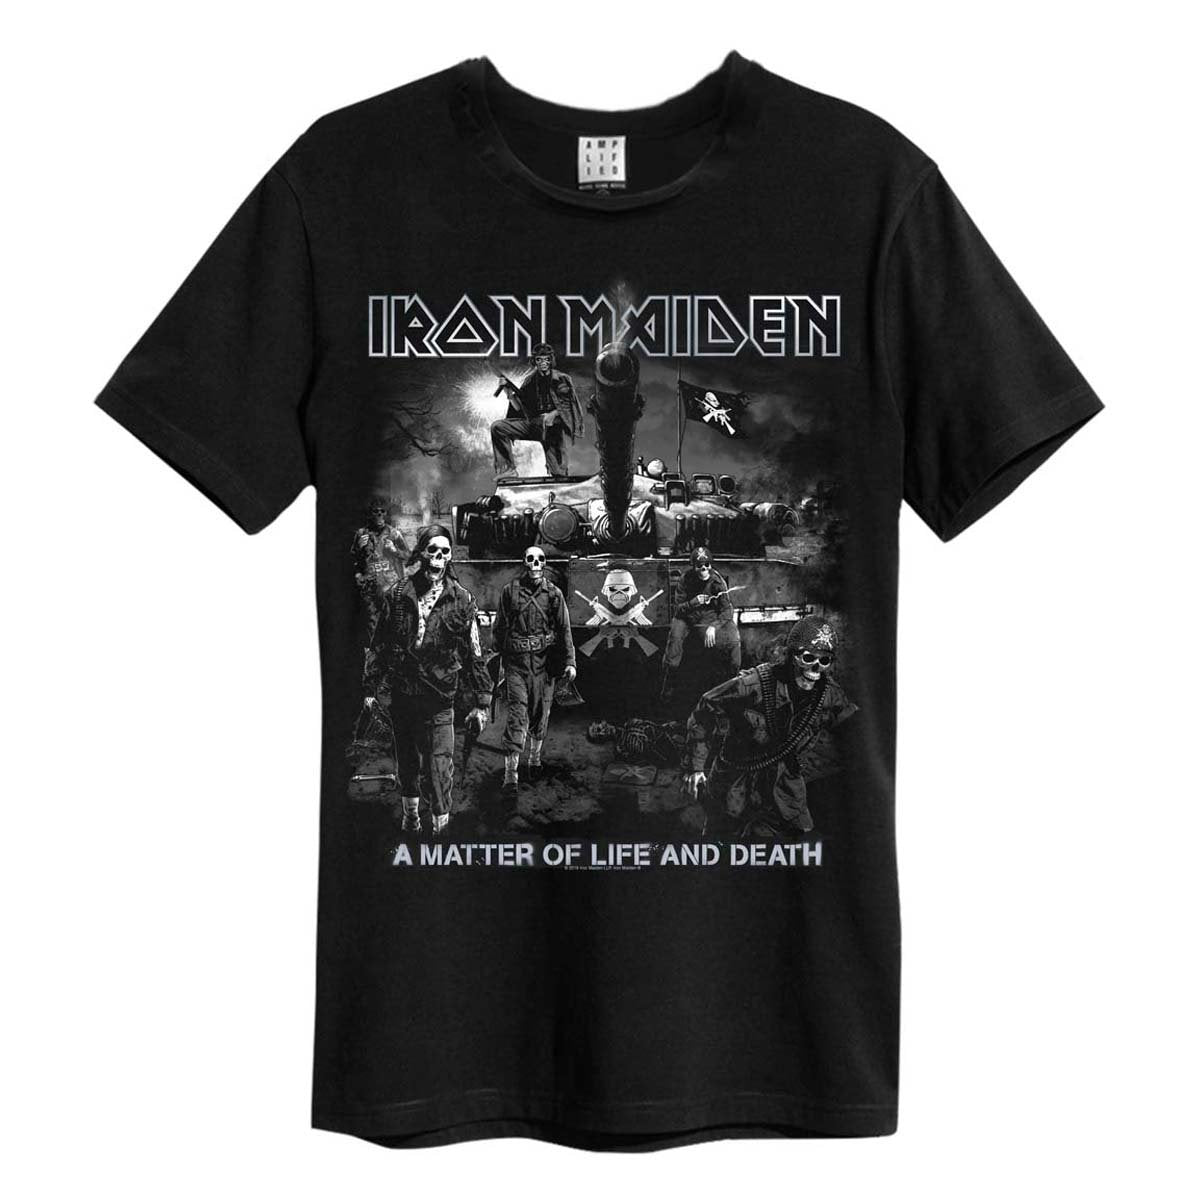 Charcoal Iron Maiden - Life or death tee